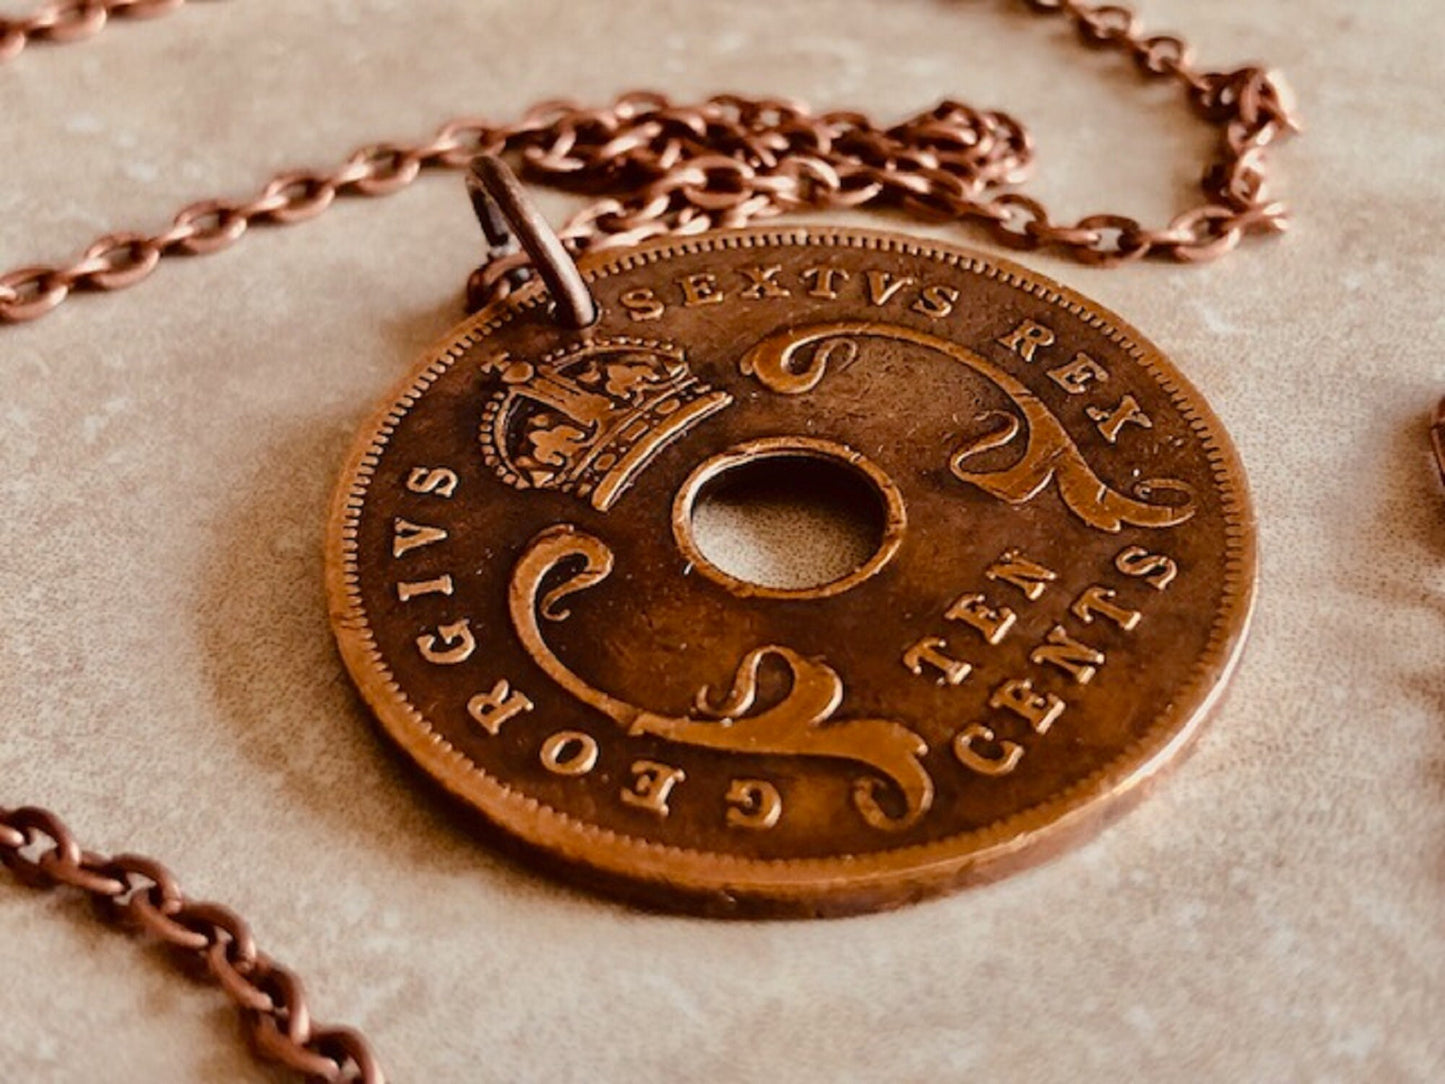 East Africa Coin Pendant 10 Cents African Personal Necklace Old Vintage Handmade Jewelry Gift Friend Charm For Him Her World Coin Collector